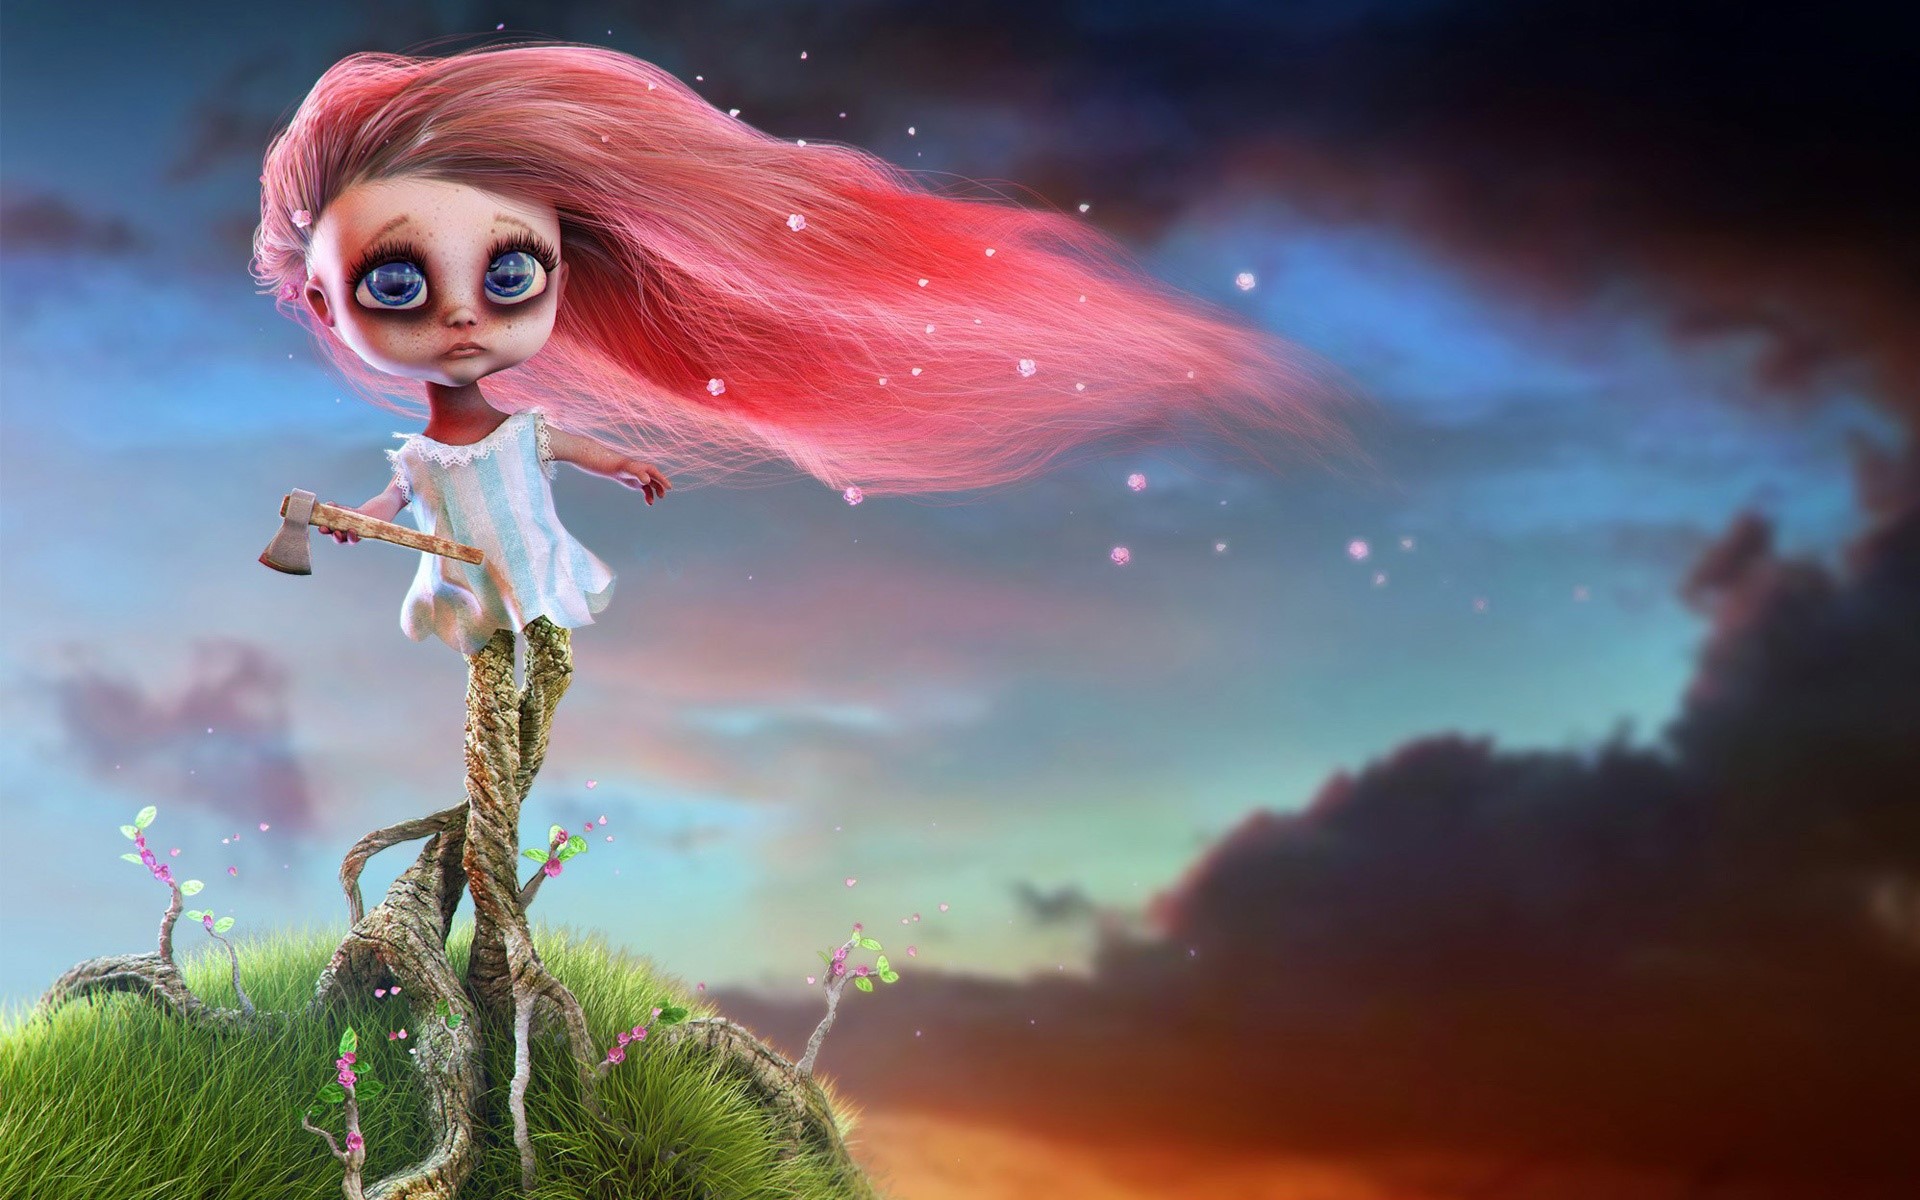 Doll Fantasy Girl Hair Blowing In The Wind Sky Clouds Grass Long Hair Pink Hair Blue Eyes Axes 1920x1200